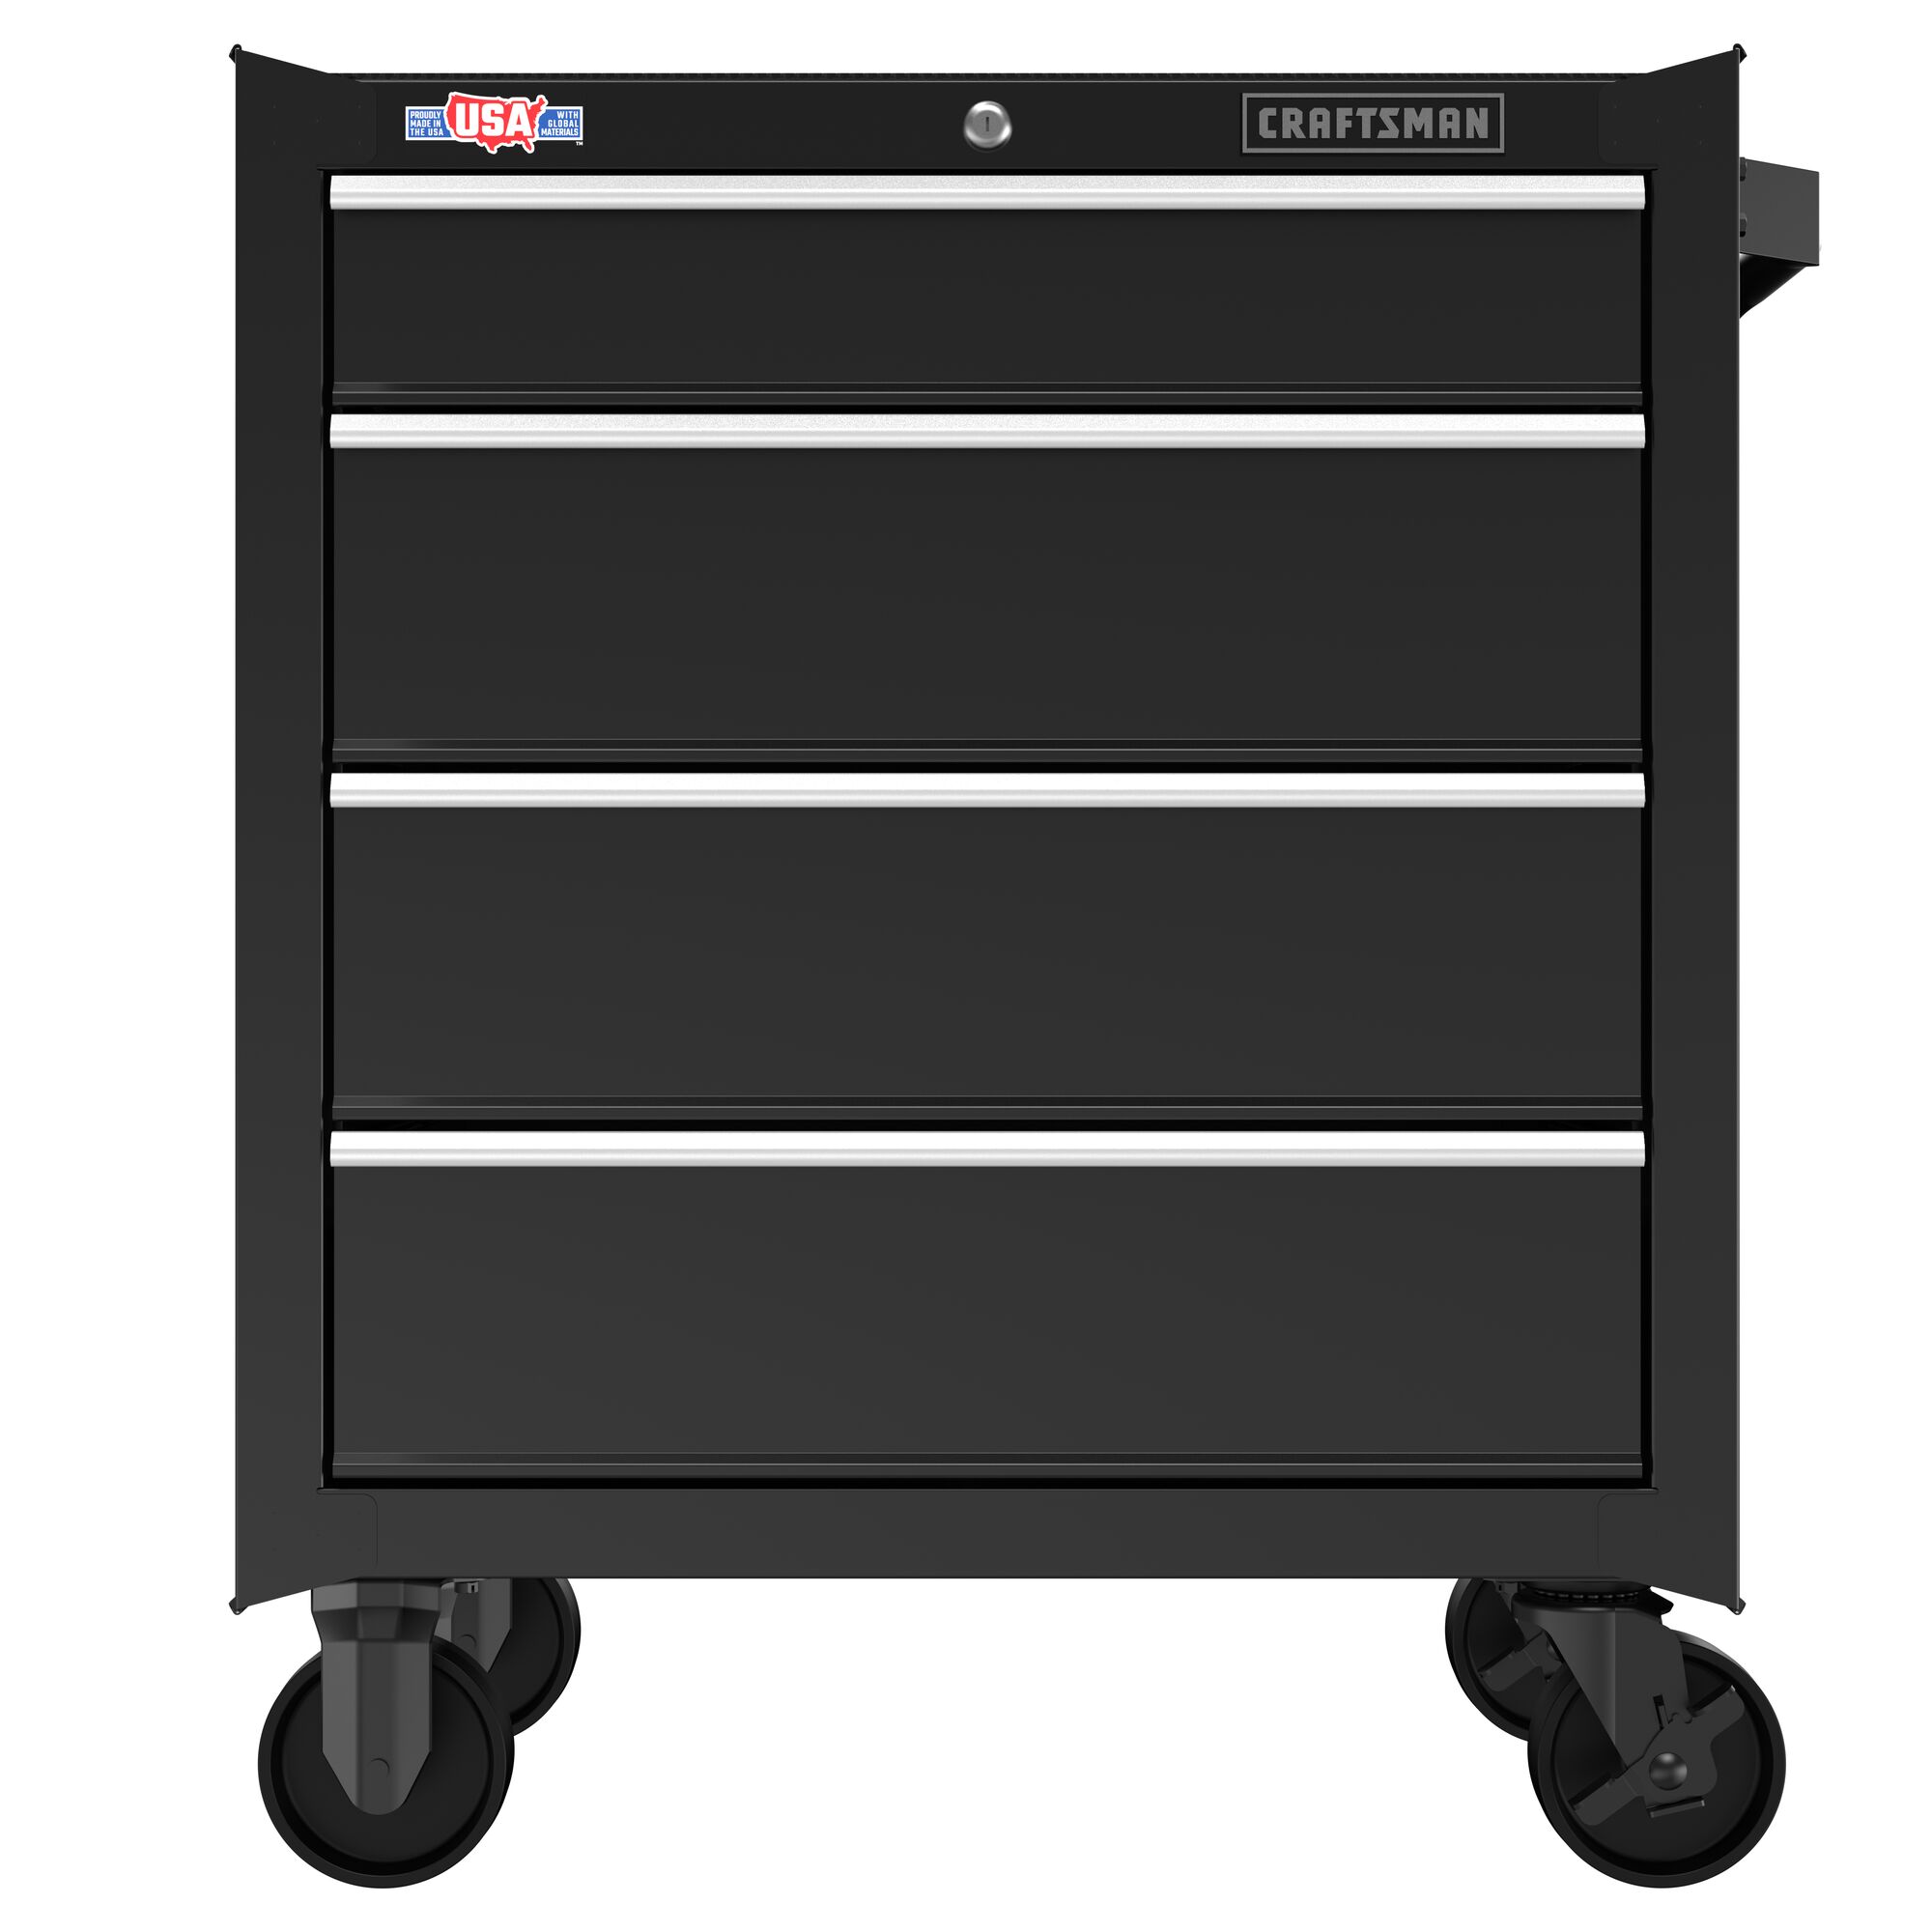 CRAFTSMAN 4 drawer cabinet front shot highlighting wheels and drawers